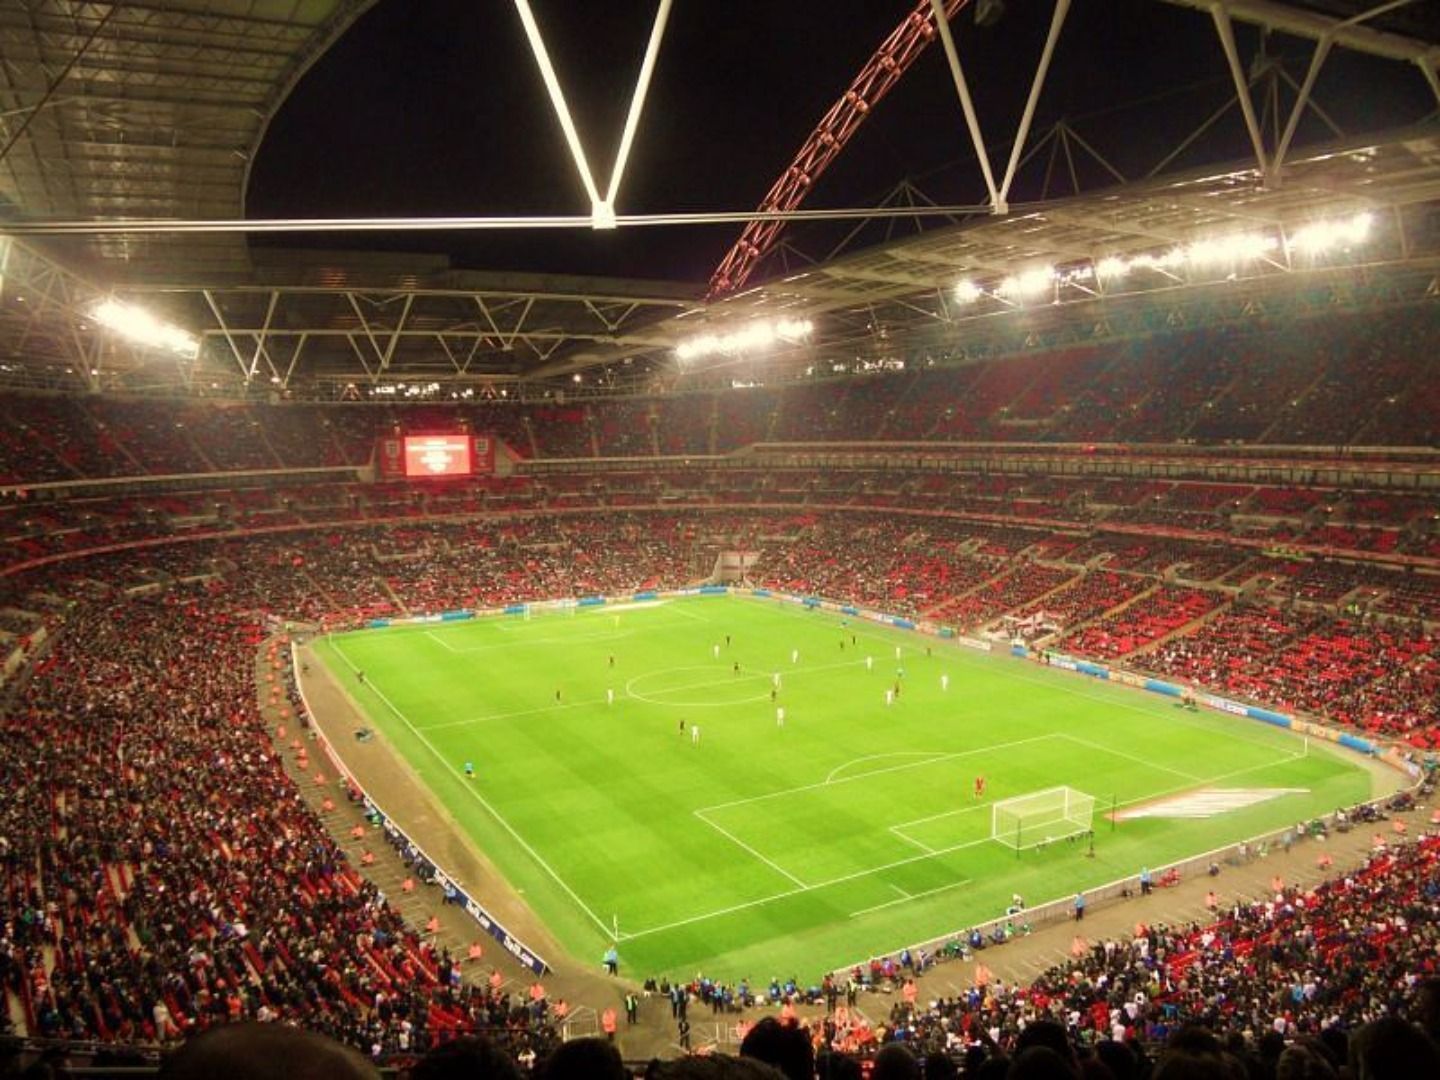 Wembley is one of the most imposing stadiums in the world.